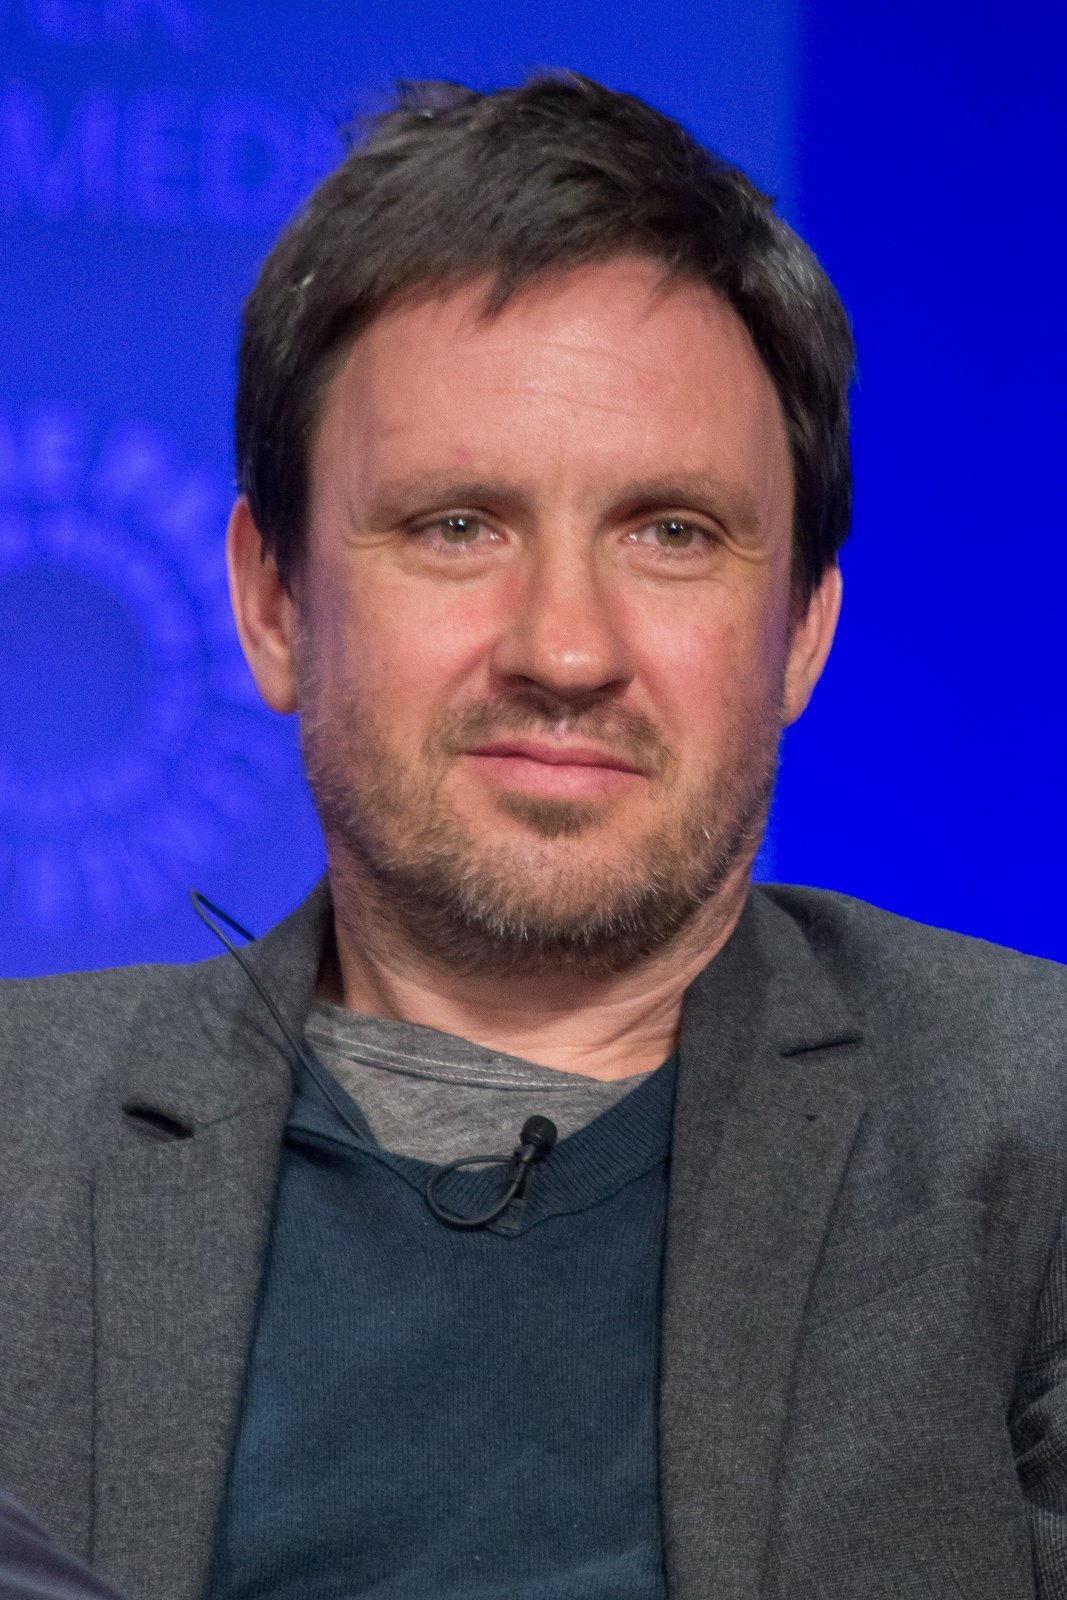 Alex Cary at PaleyFest 2015, an Evening with the Cast and Creative Team of Homeland. | Source: Wikimedia Commons